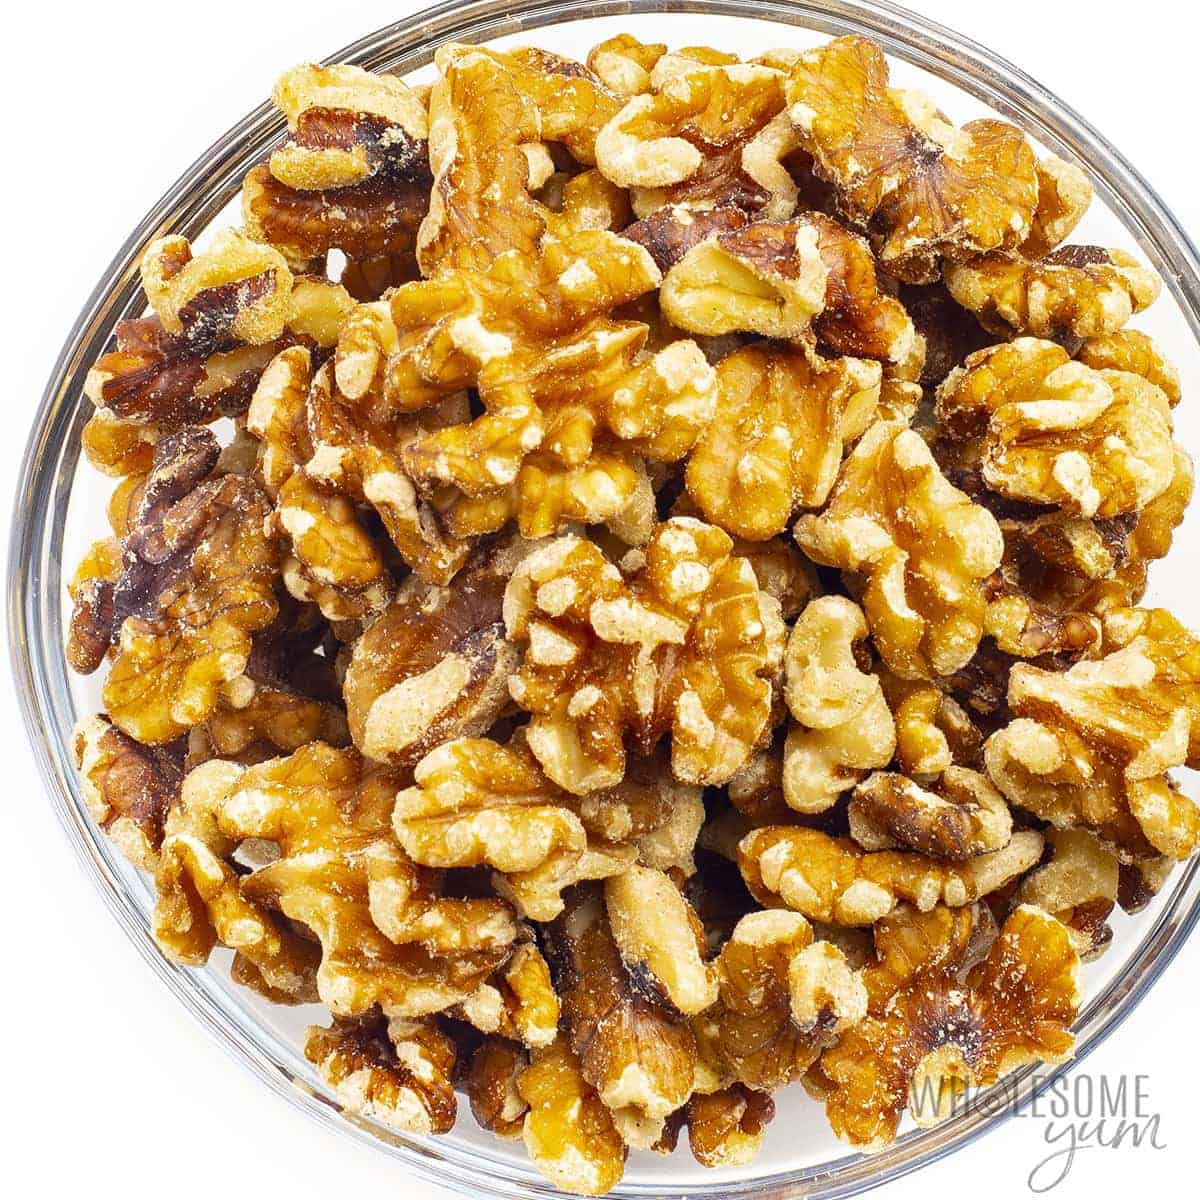 Are carbs in walnuts high? These fresh walnuts are low enough in carb to enjoy on keto.